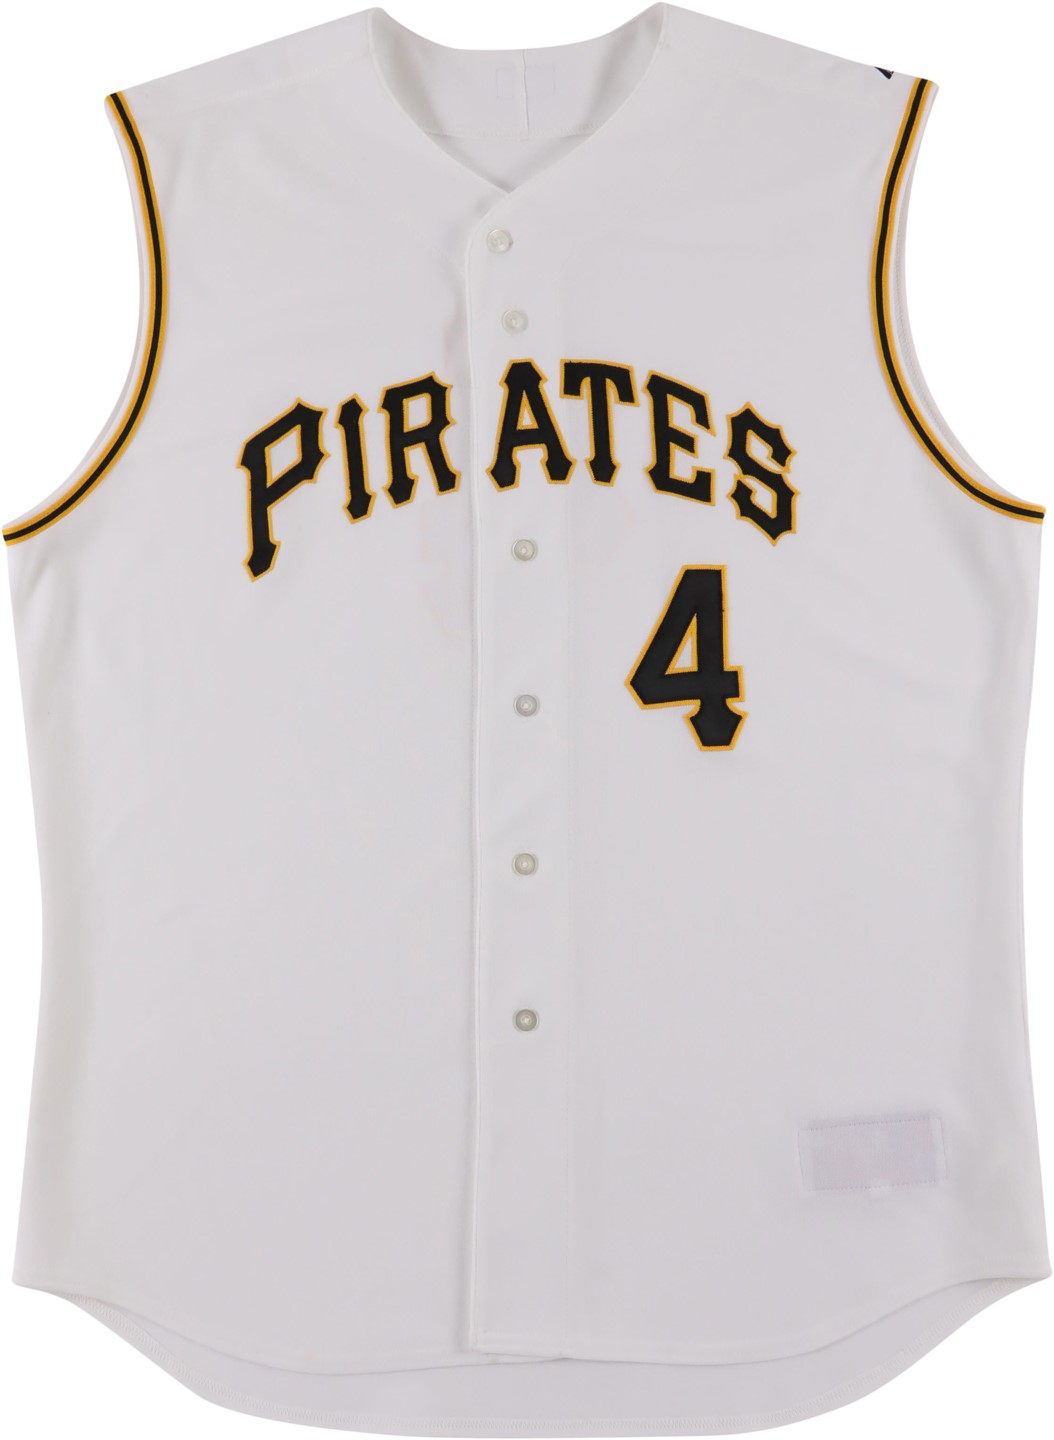 - Circa 2000s Ralph Kiner Pittsburgh Pirates "Old Timers Day" Jersey